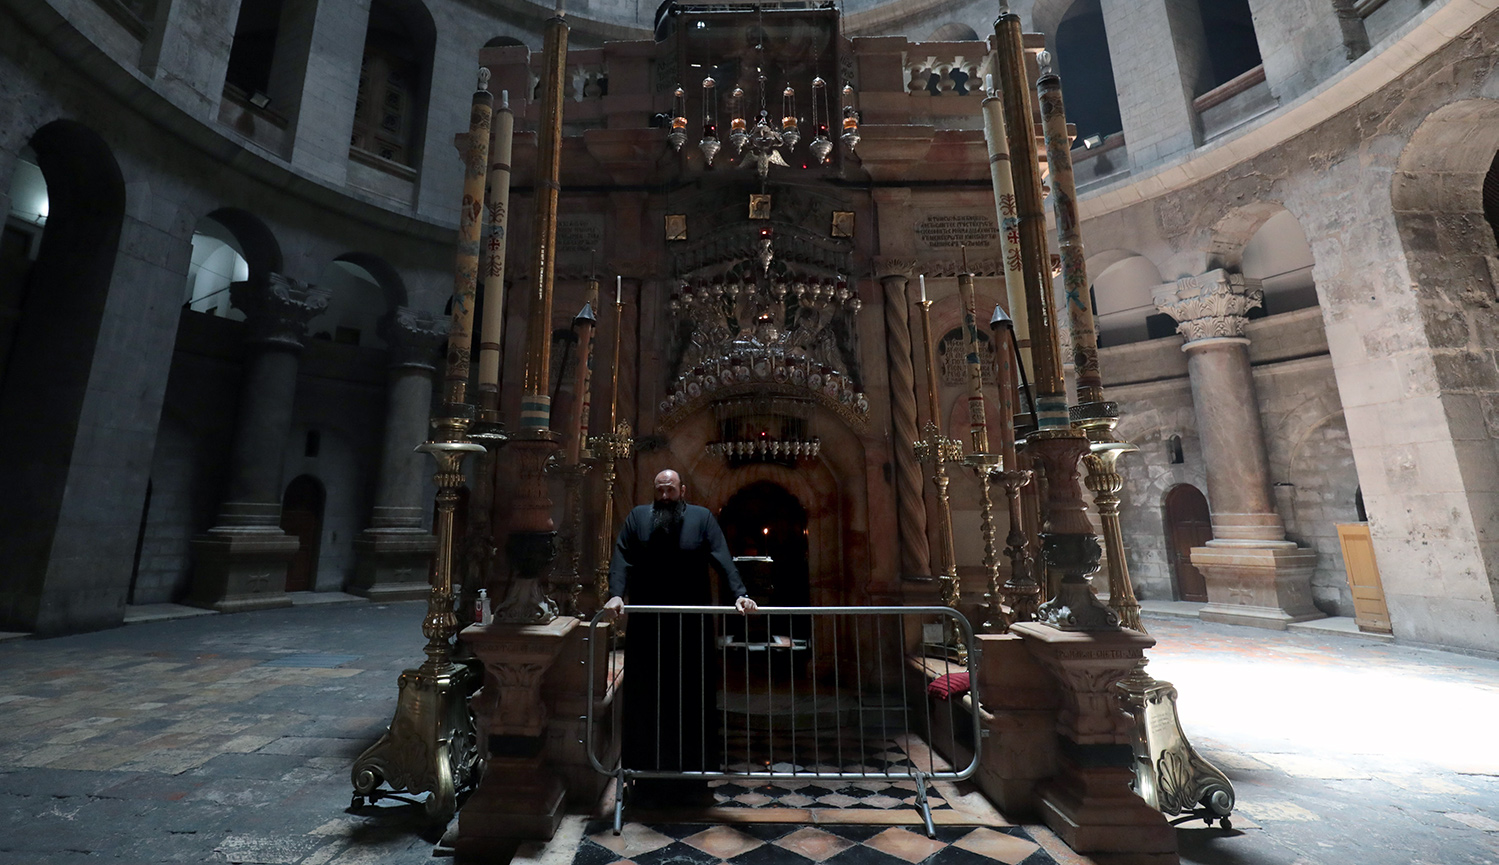 A Greek Orthodox monk stands behind a barricade at the entrance of the Edicule in the Church of the Holy Sepulchre, on May 26, 2020. GALI TIBBON/AFP via Getty Images.
